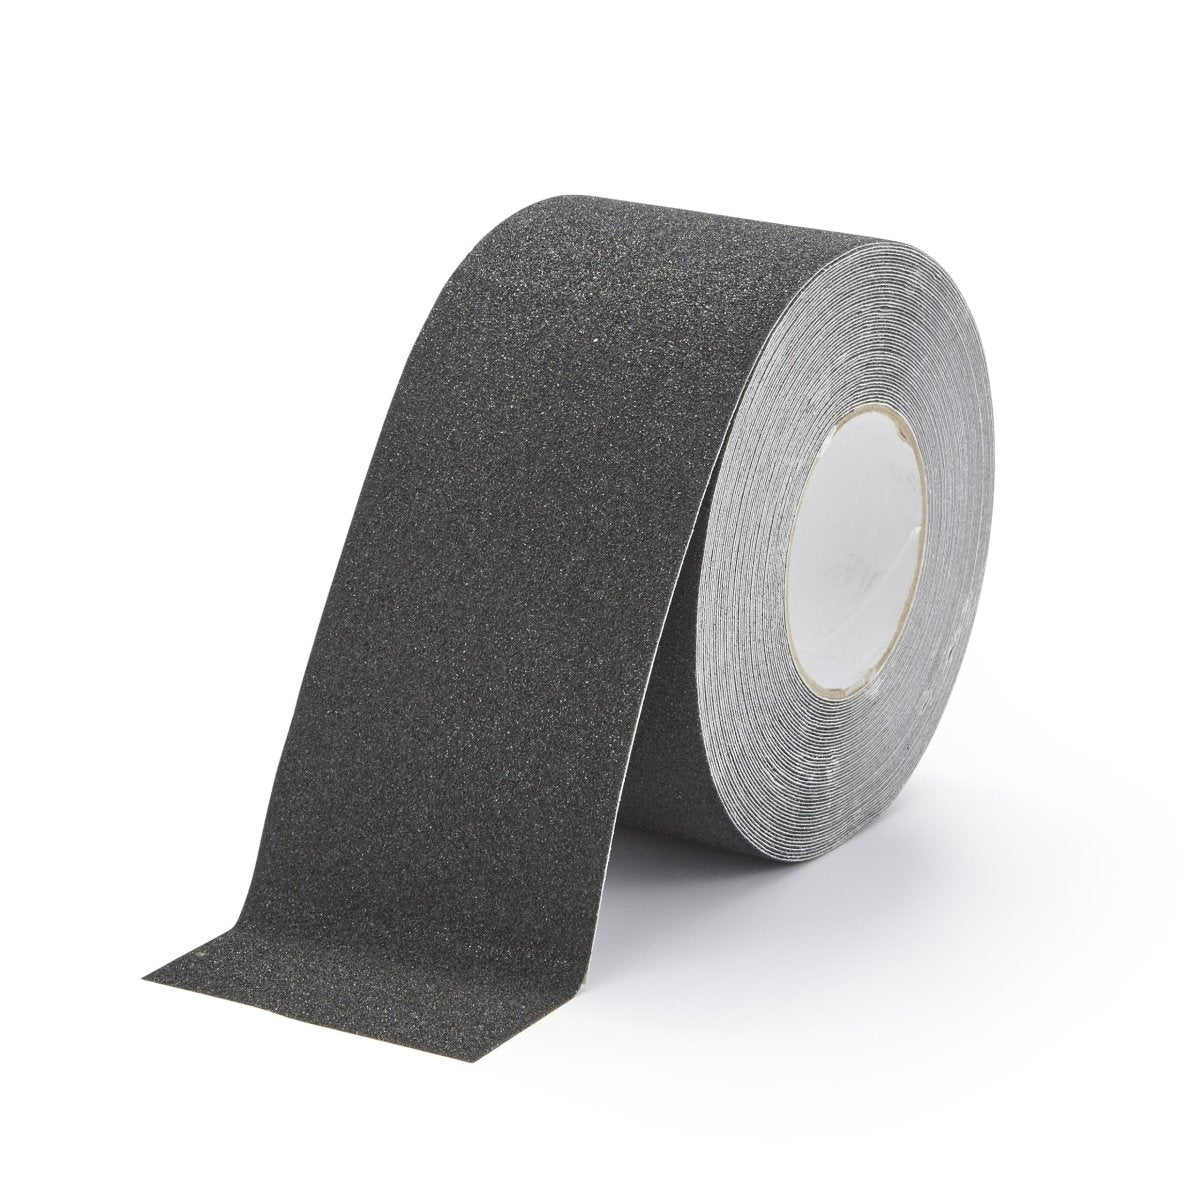 Conformable Traction Grade Anti Slip Tape Rolls - Slips Away - Conformable Anti-Slip Tape - H3406N-Conformable-Safety-Grip-Black-100mm-2-1 -